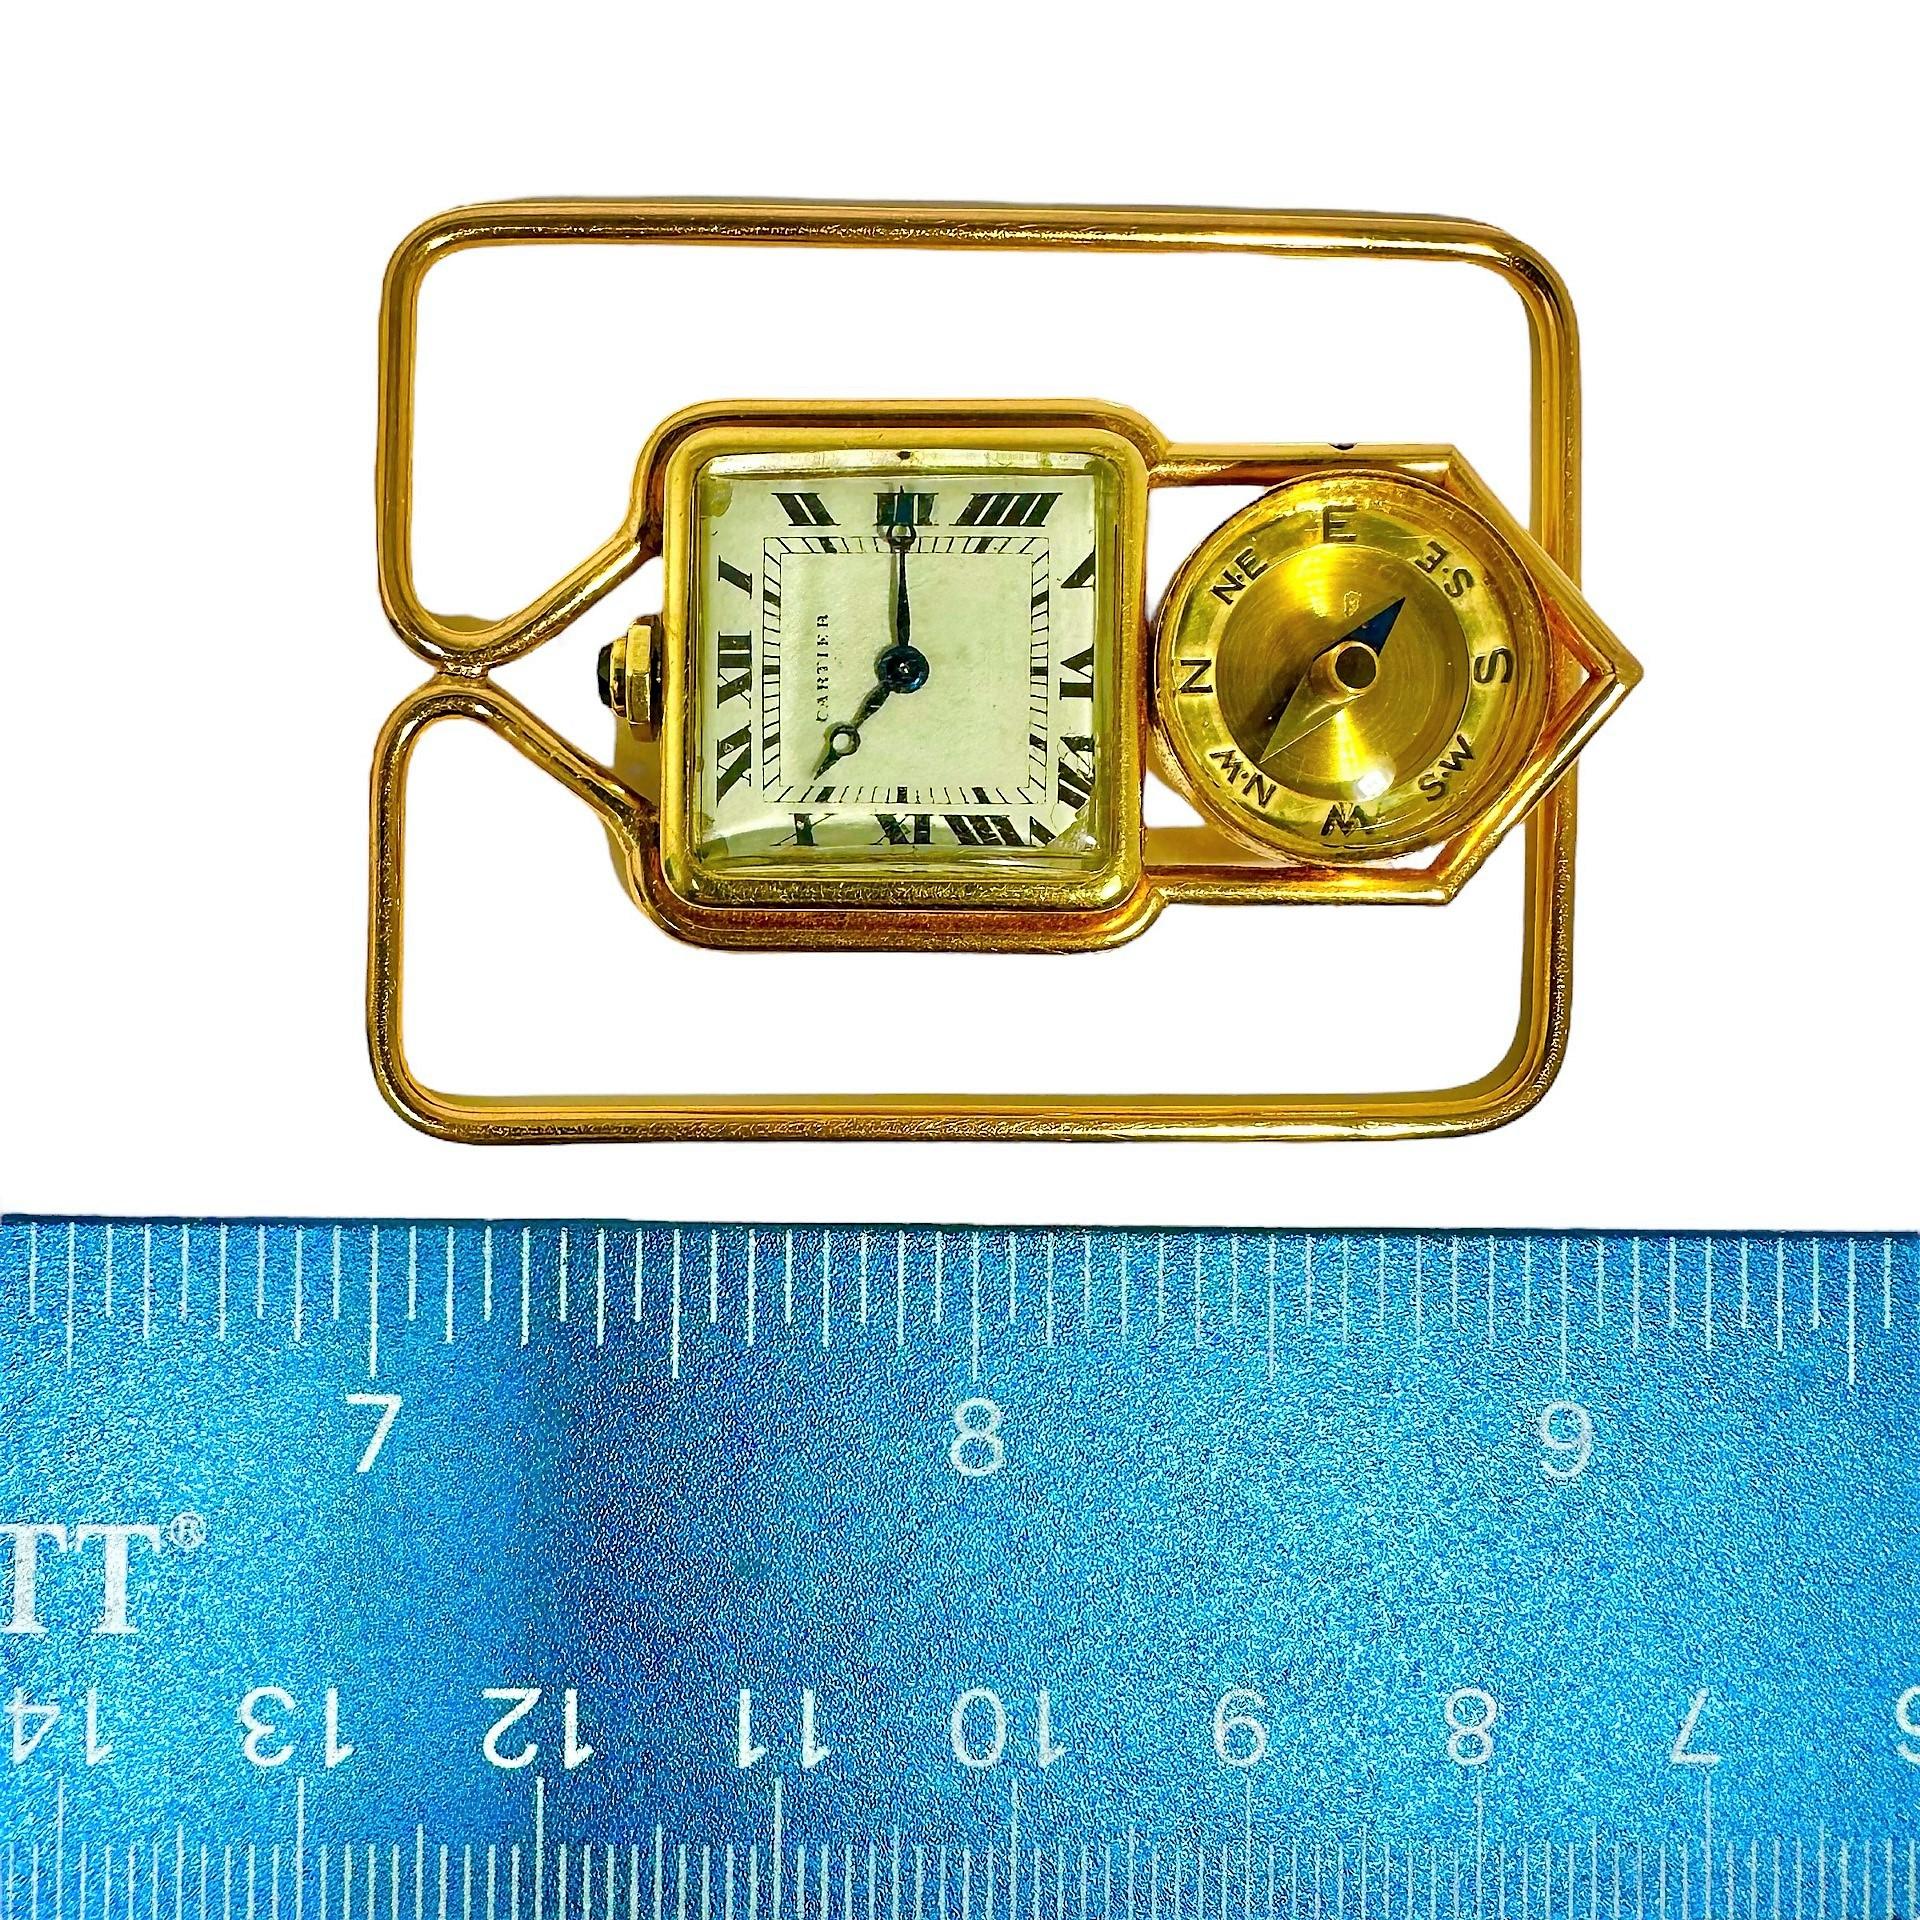 Men's Rare 18k Gold French Cartier Art Deco Money Clip with Watch & Compass Attached